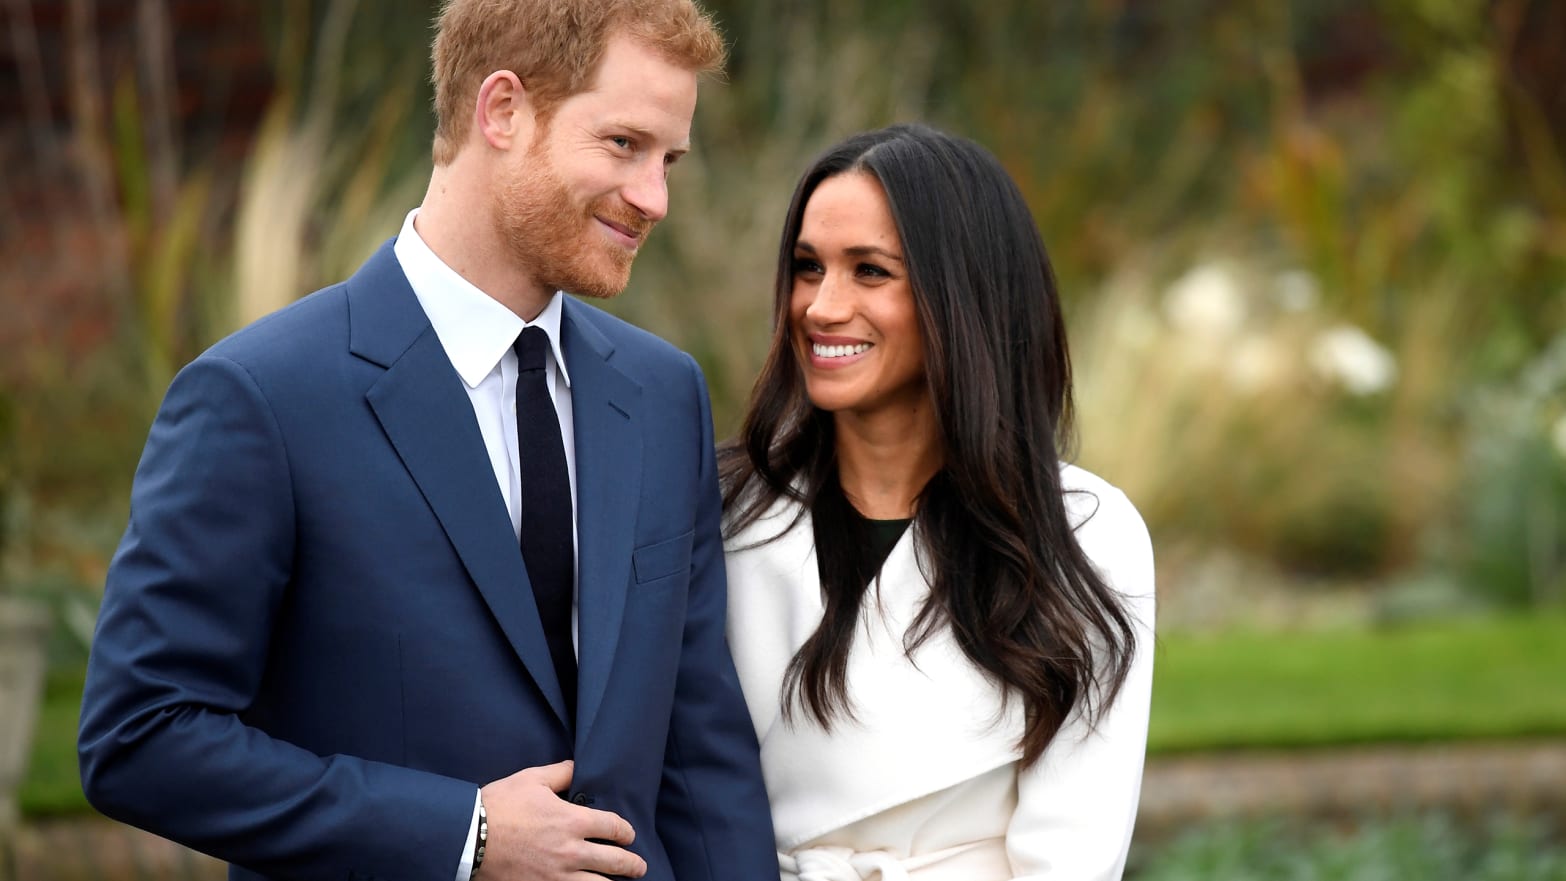 Britain's Prince Harry poses with Meghan Markle in the Sunken Garden of Kensington Palace, London, Britain, November 27, 2017.